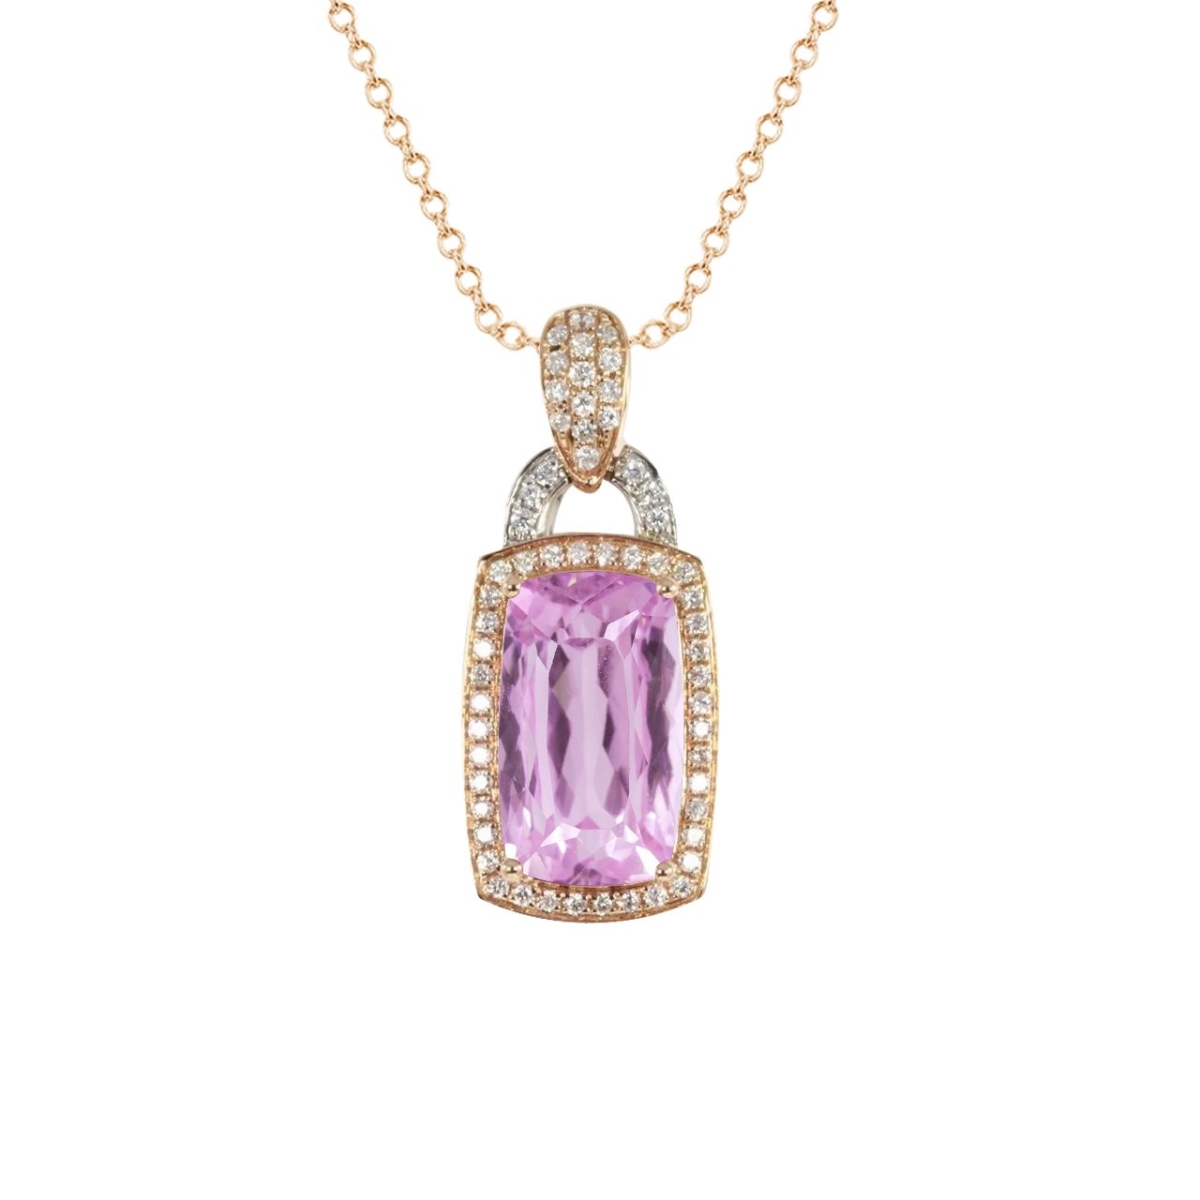 Picture of Harry Chad Enterprises 63056 17.75 CT Pink Cushion Cut Kunzite with Diamond Necklace Pendant